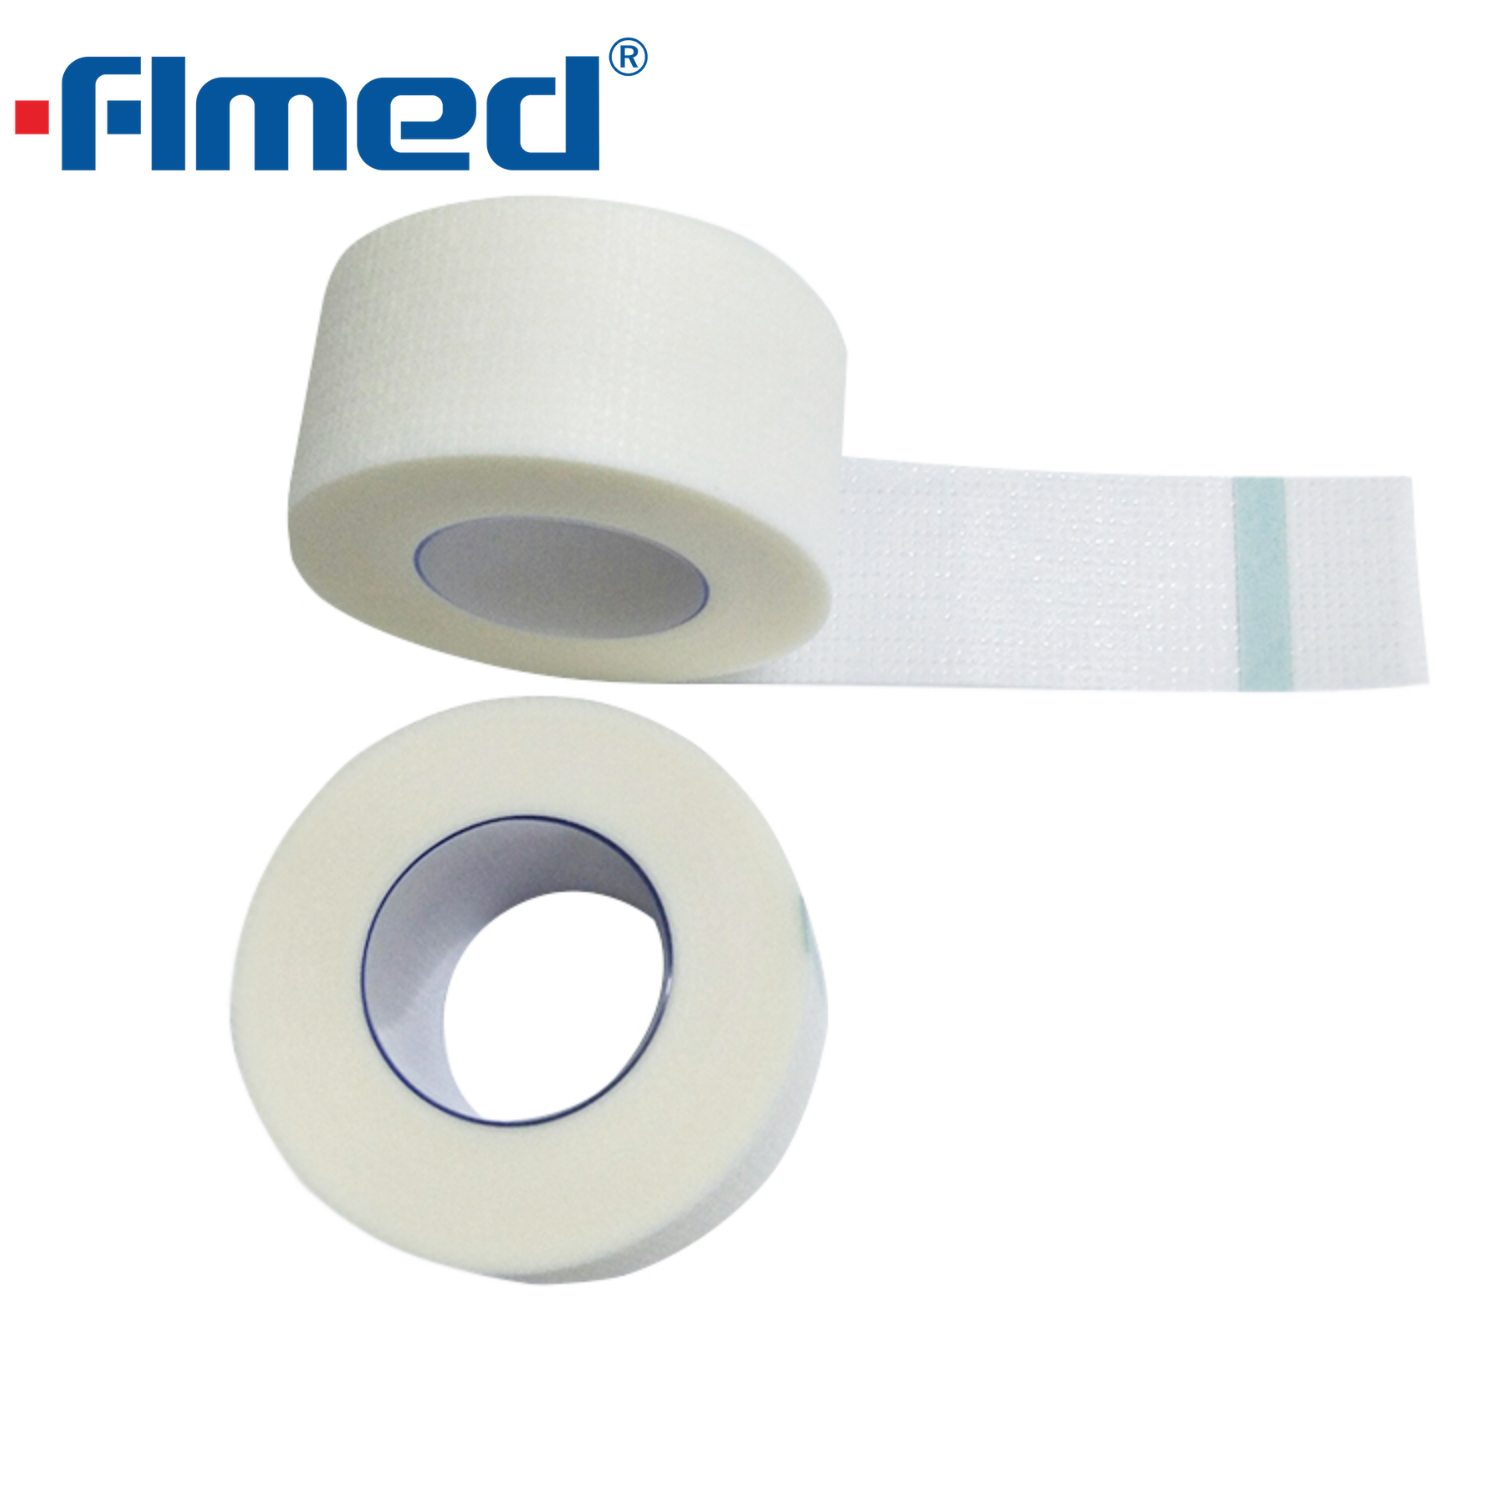 Medical Non Woven Adhesive Wound Dressing Tape Roll